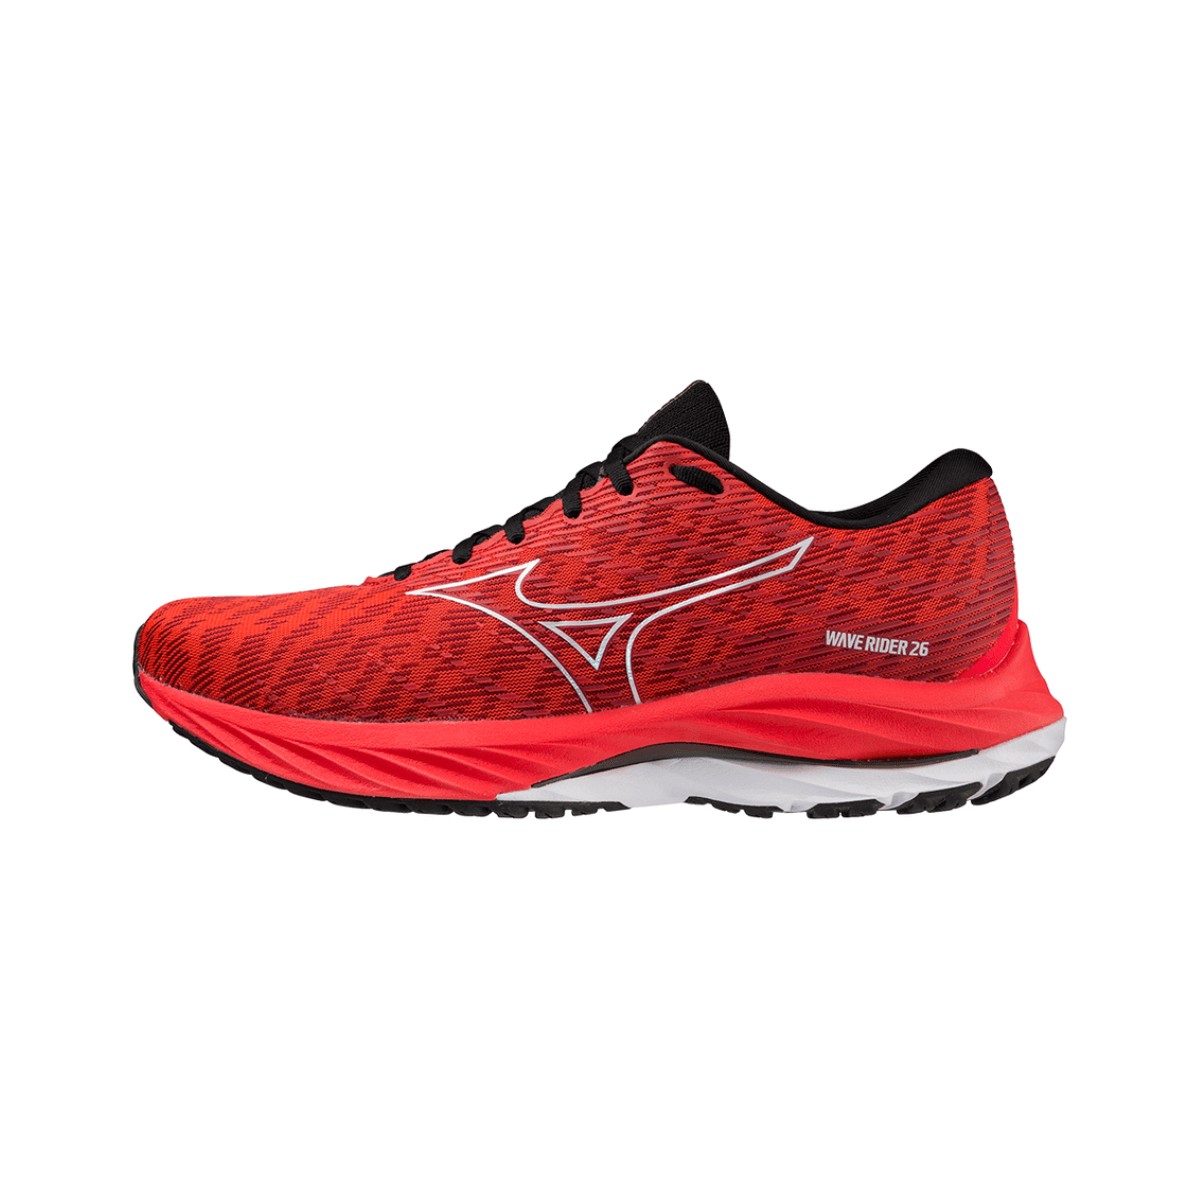 Trainers Mizuno Wave Rider 26 Red White AW22, Size 42 - EUR